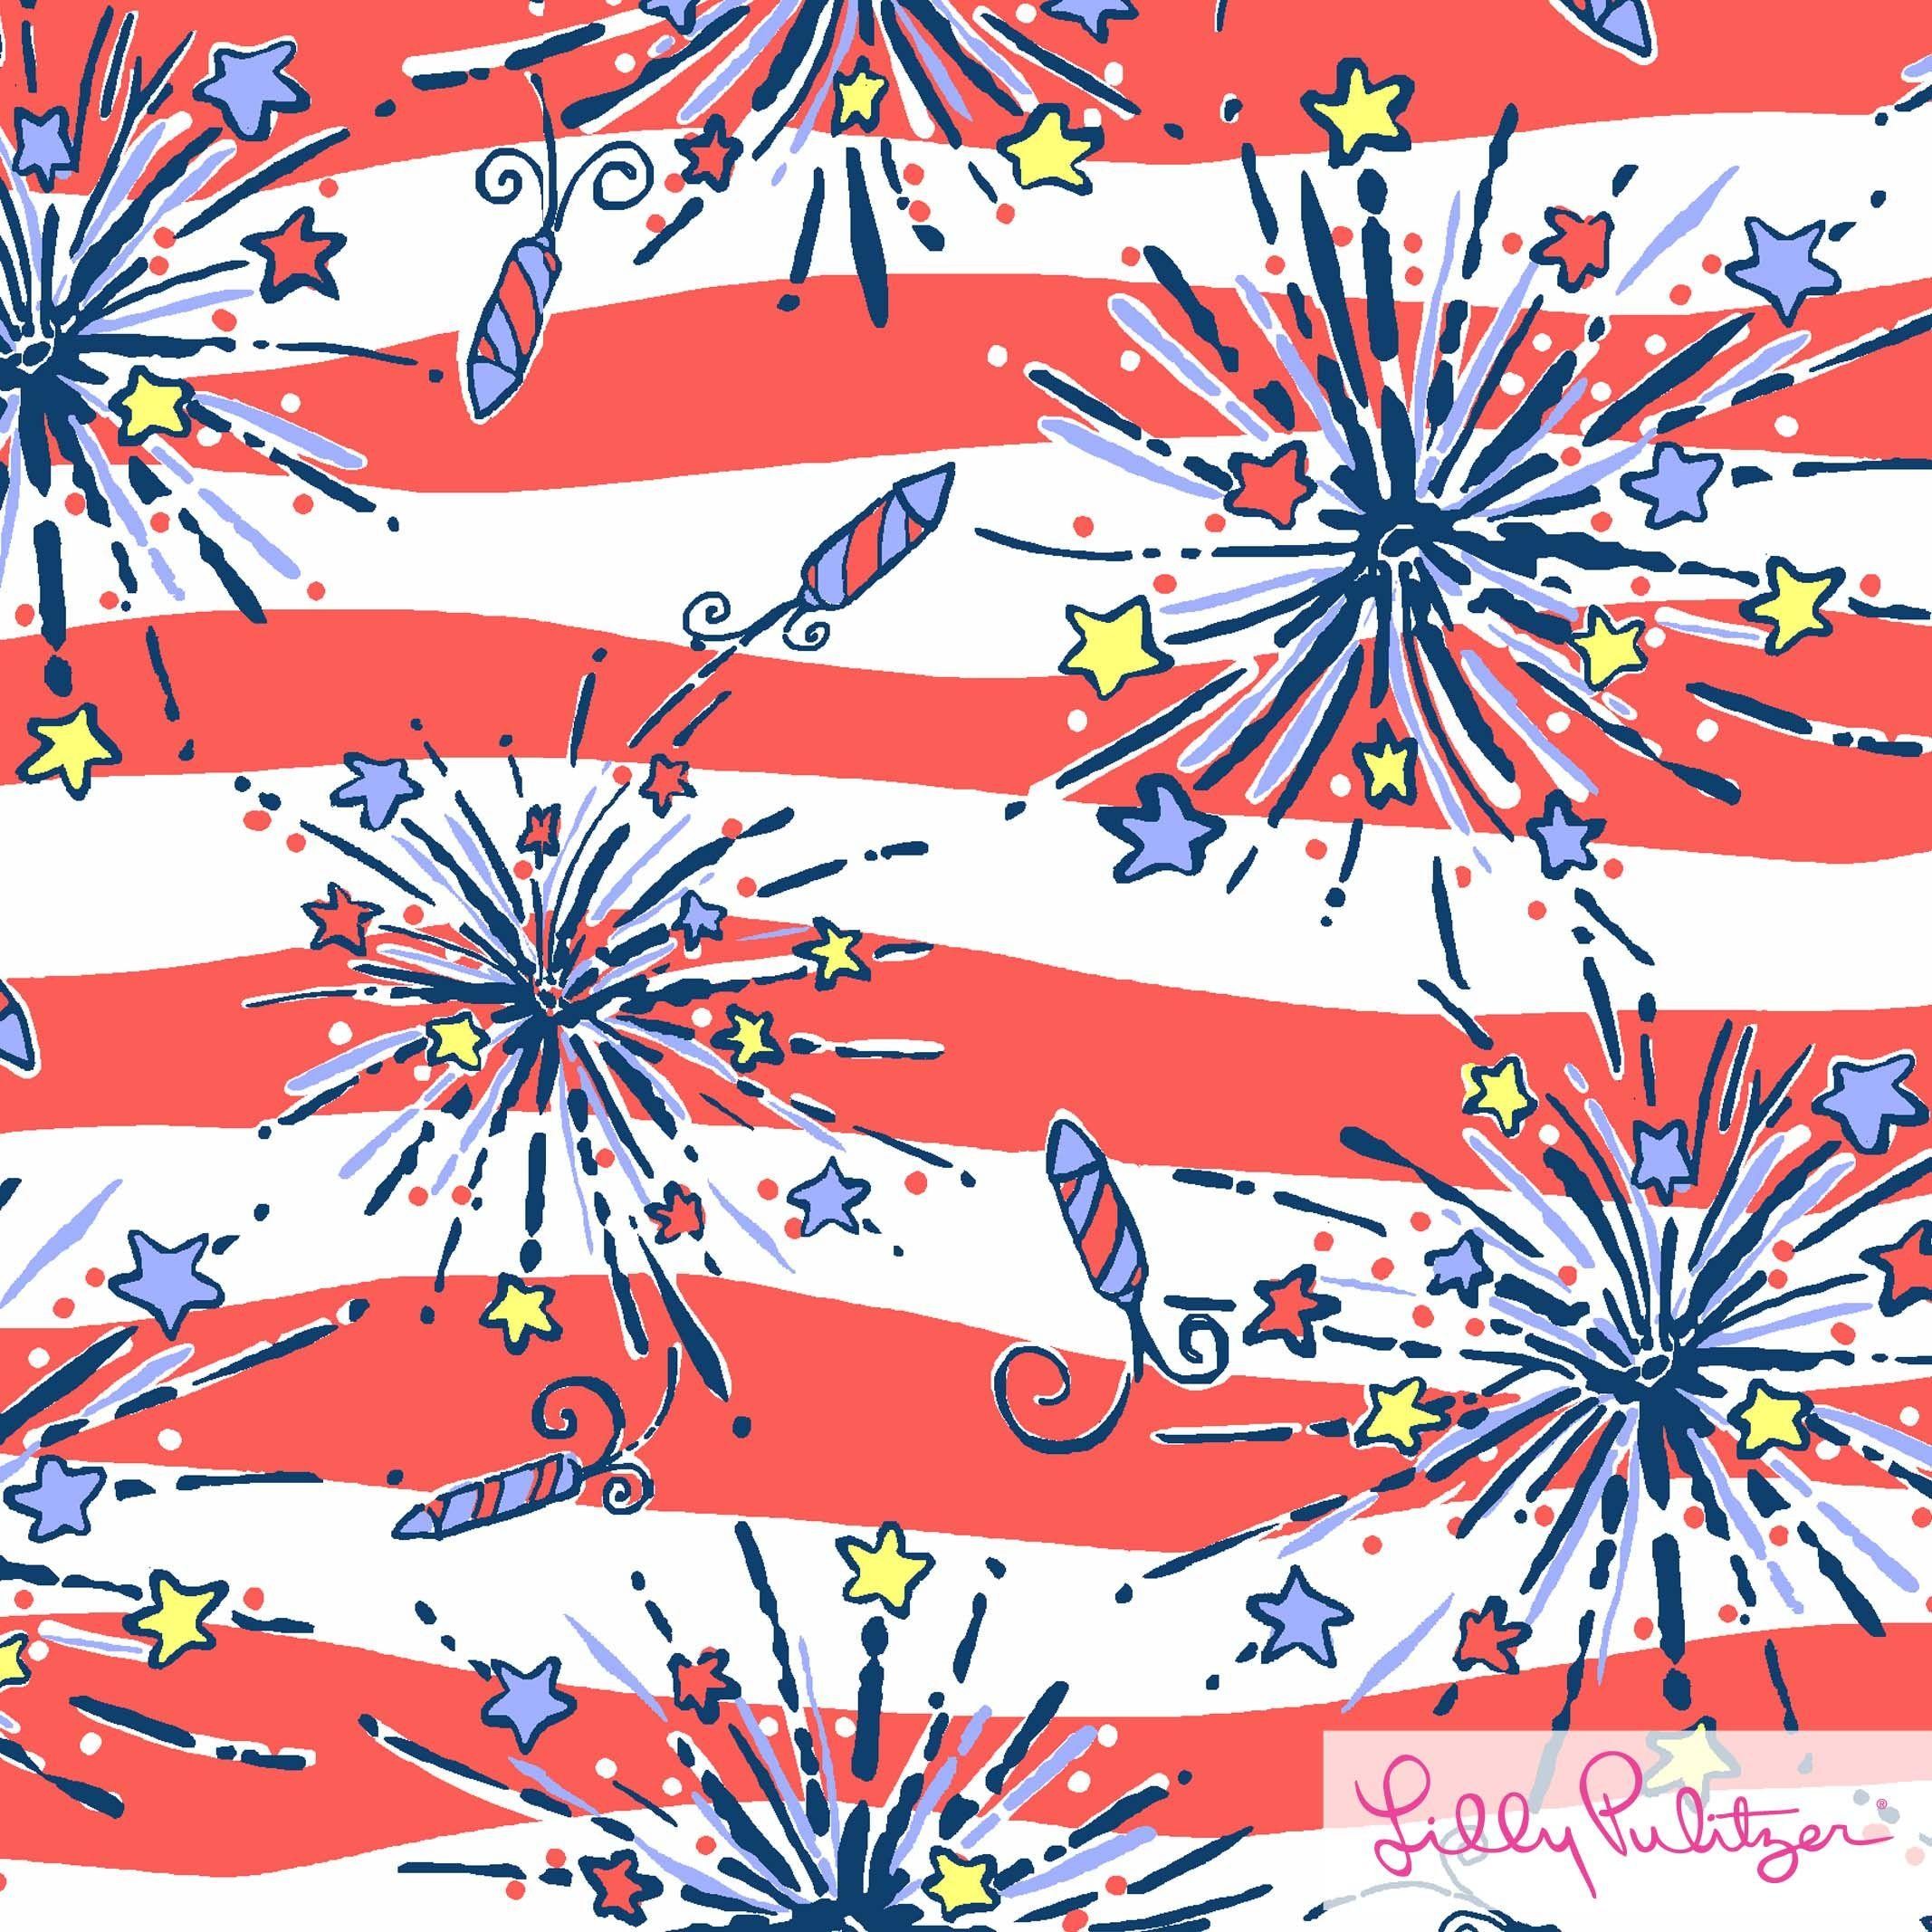 2134x2134 Lilly Pulitzer wallpapers high resolution | Graphics | Pinterest .